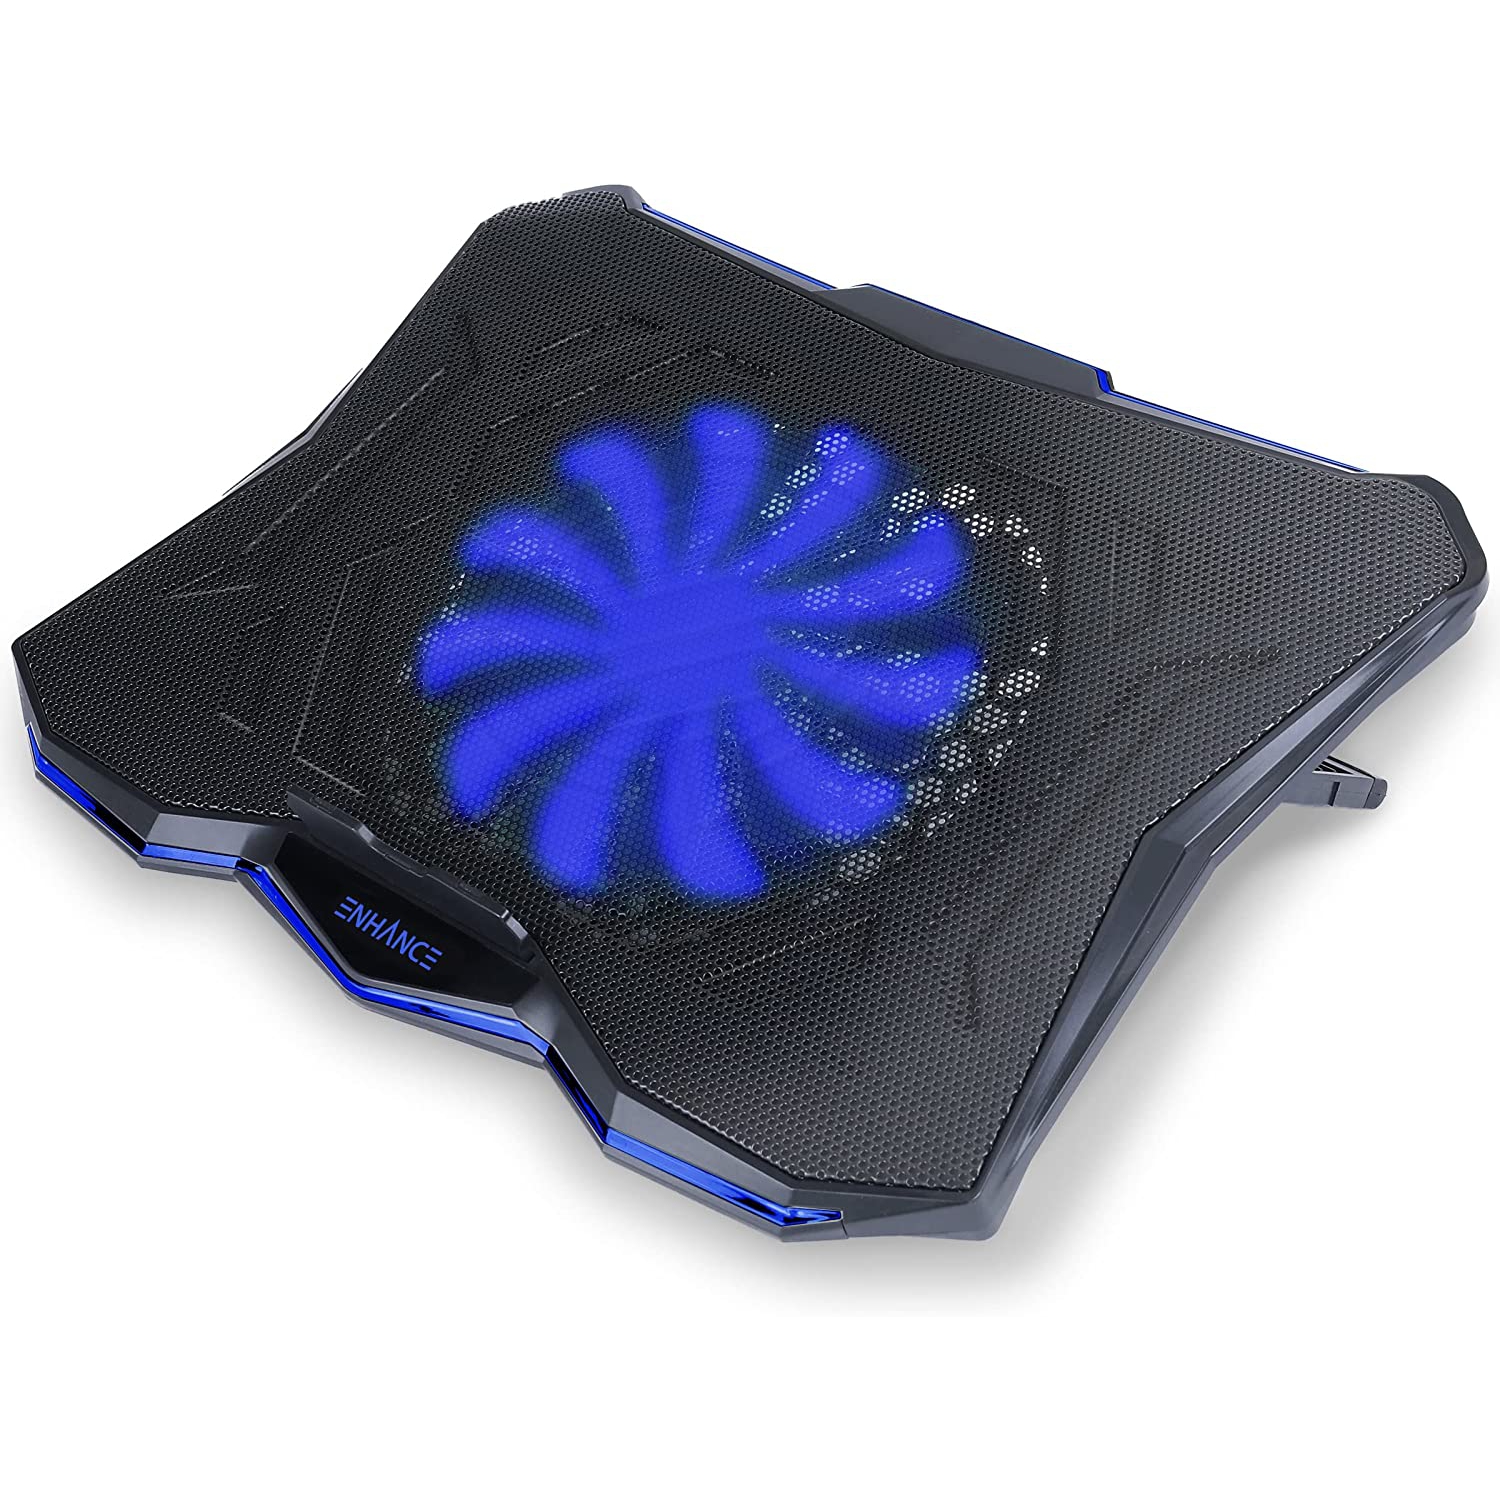 ENHANCE Cryogen 5 Gaming Laptop Cooling Pad Stand - Laptop Cooler with 7 Adjustable Height & Dual USB Ports for 17 inch Laptops - High Performance LED Laptop Fan 800 RPM - Blue